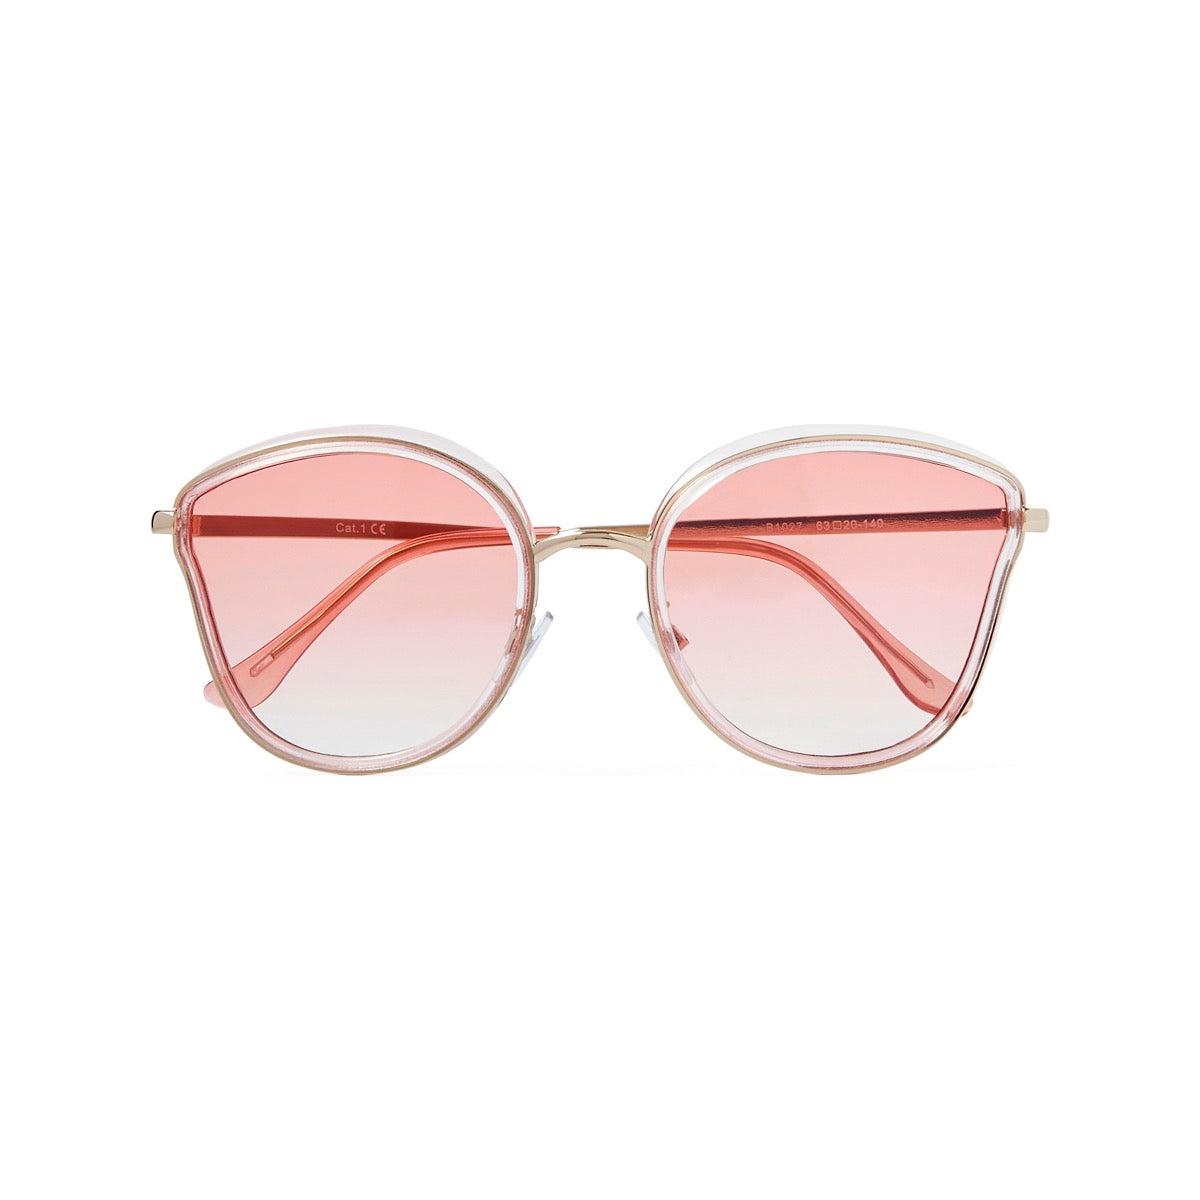 Cat eye glasses with pink lenses